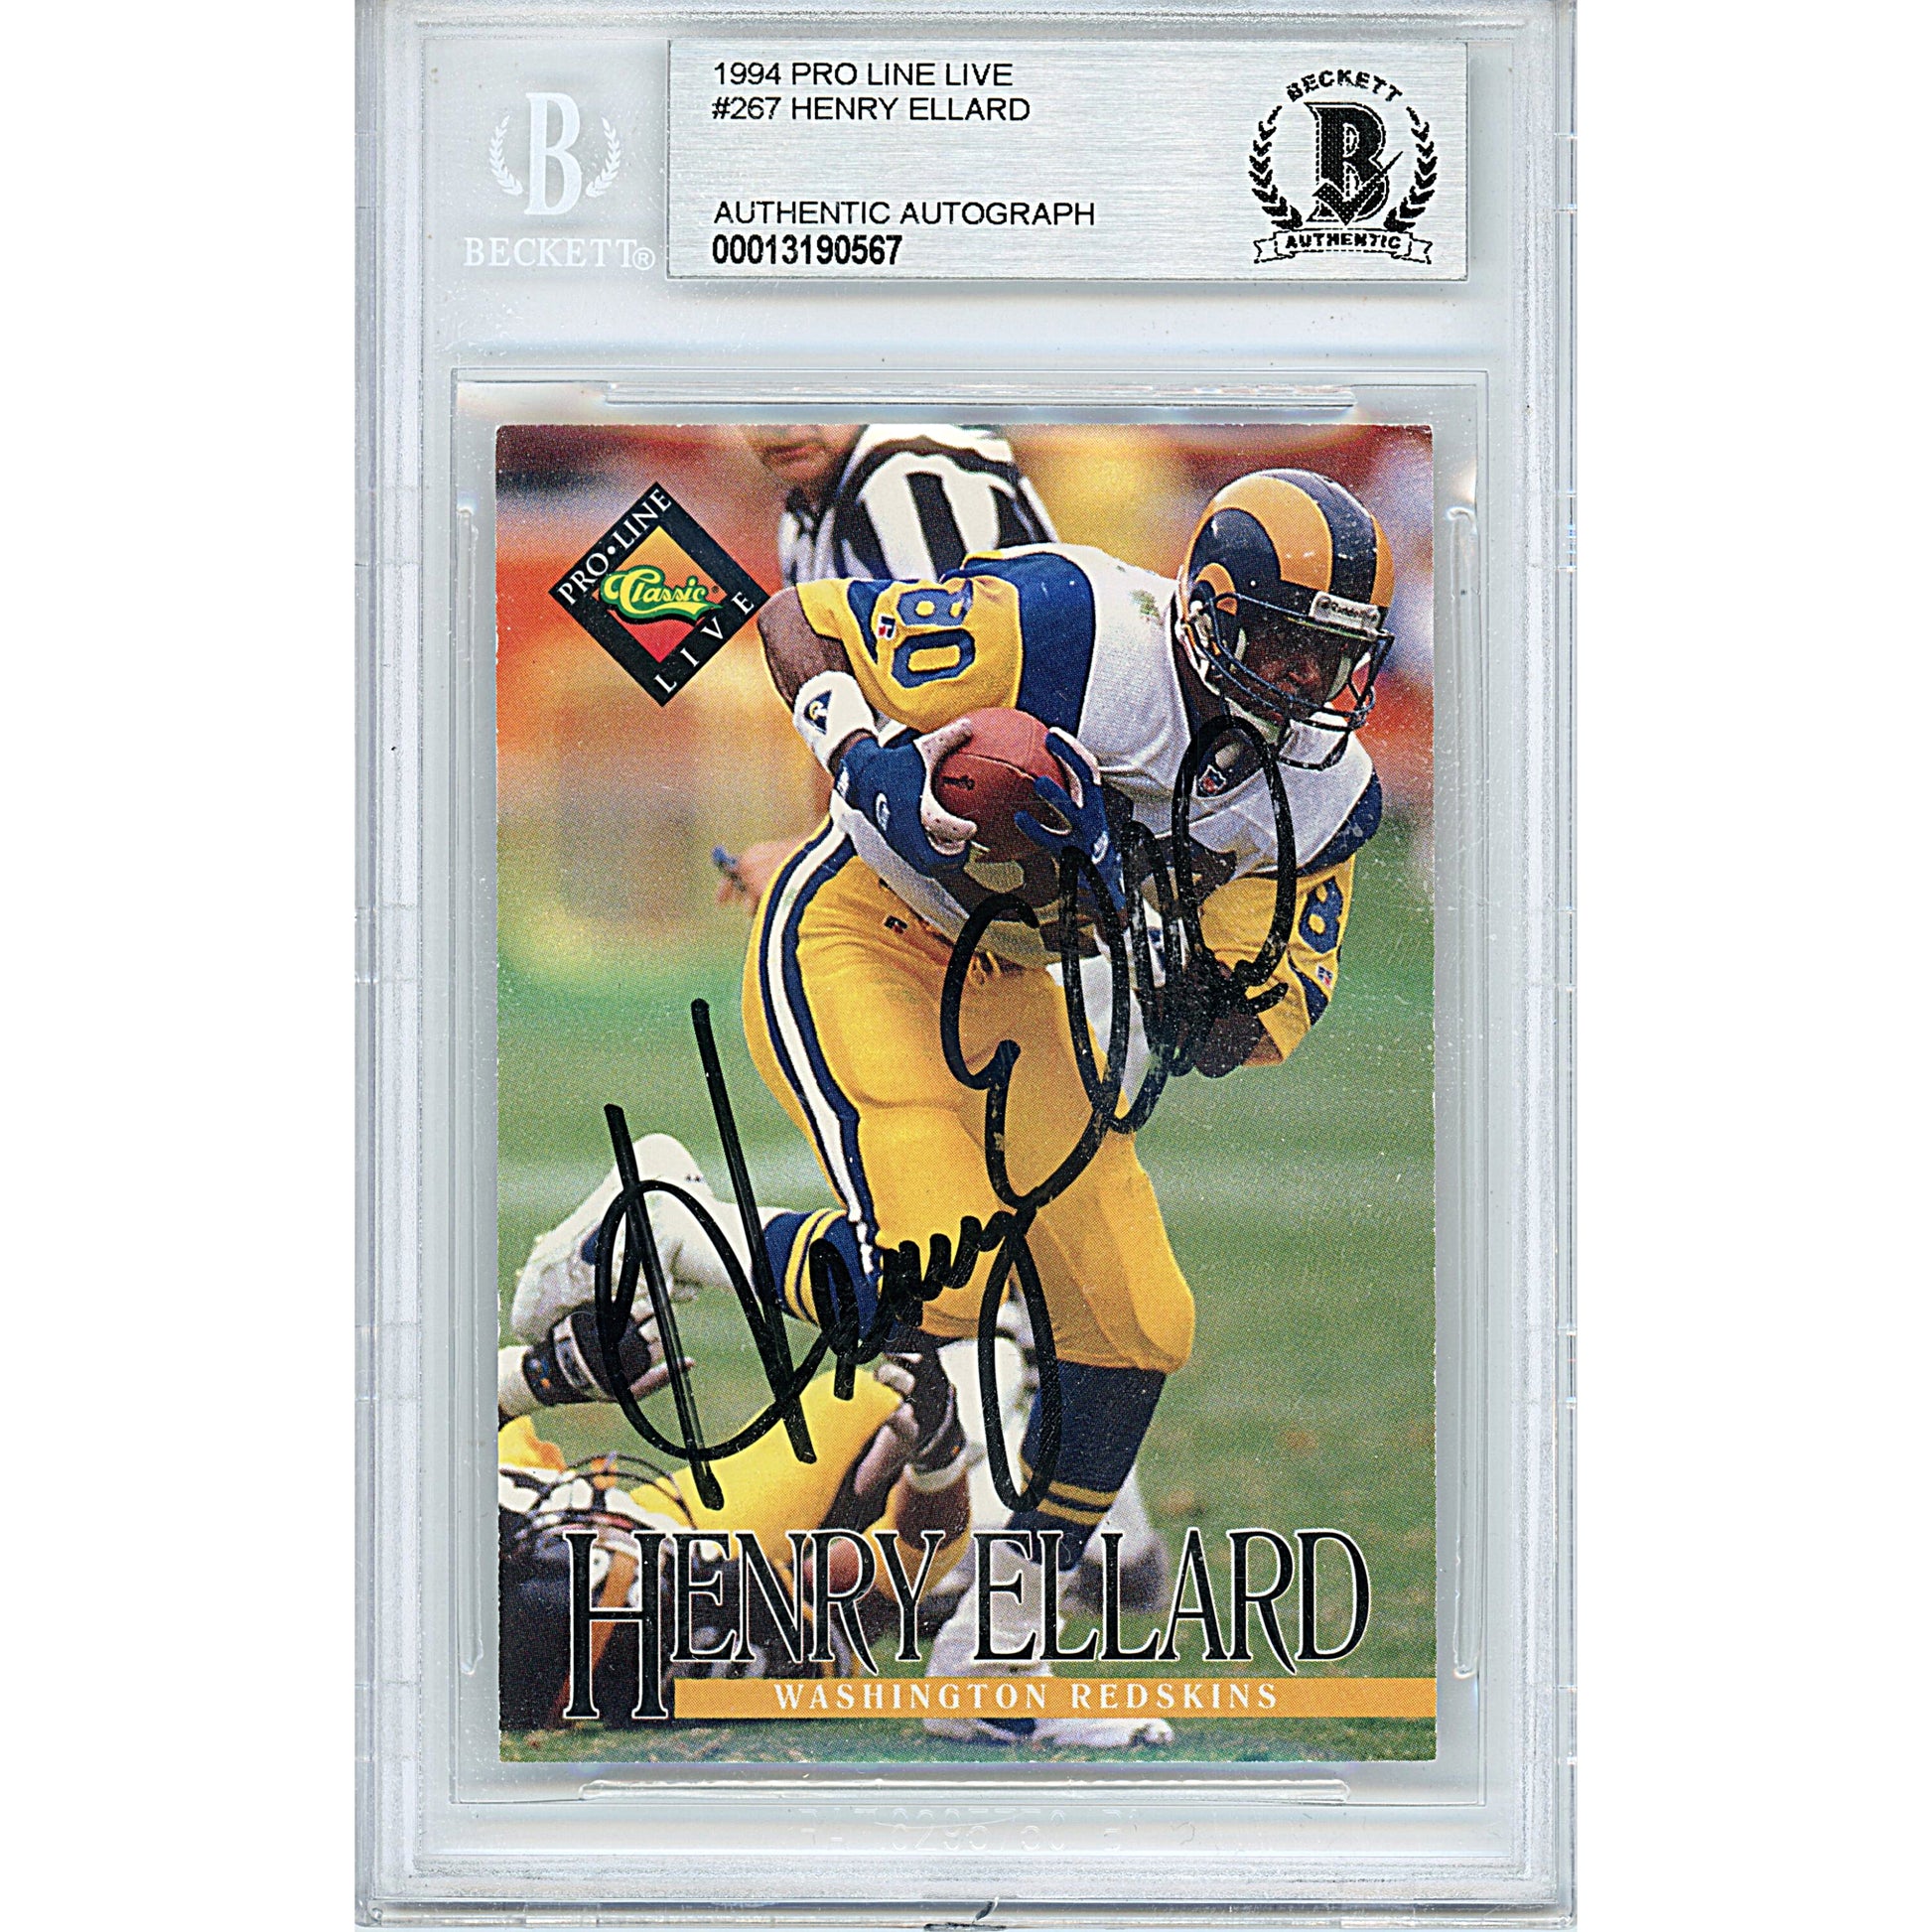 Footballs- Autographed- Henry Ellard Signed Los Angeles Rams 1994 Classic Pro Line Live Football Card Beckett BAS Authenticated Slabbed 00013190654 - 101